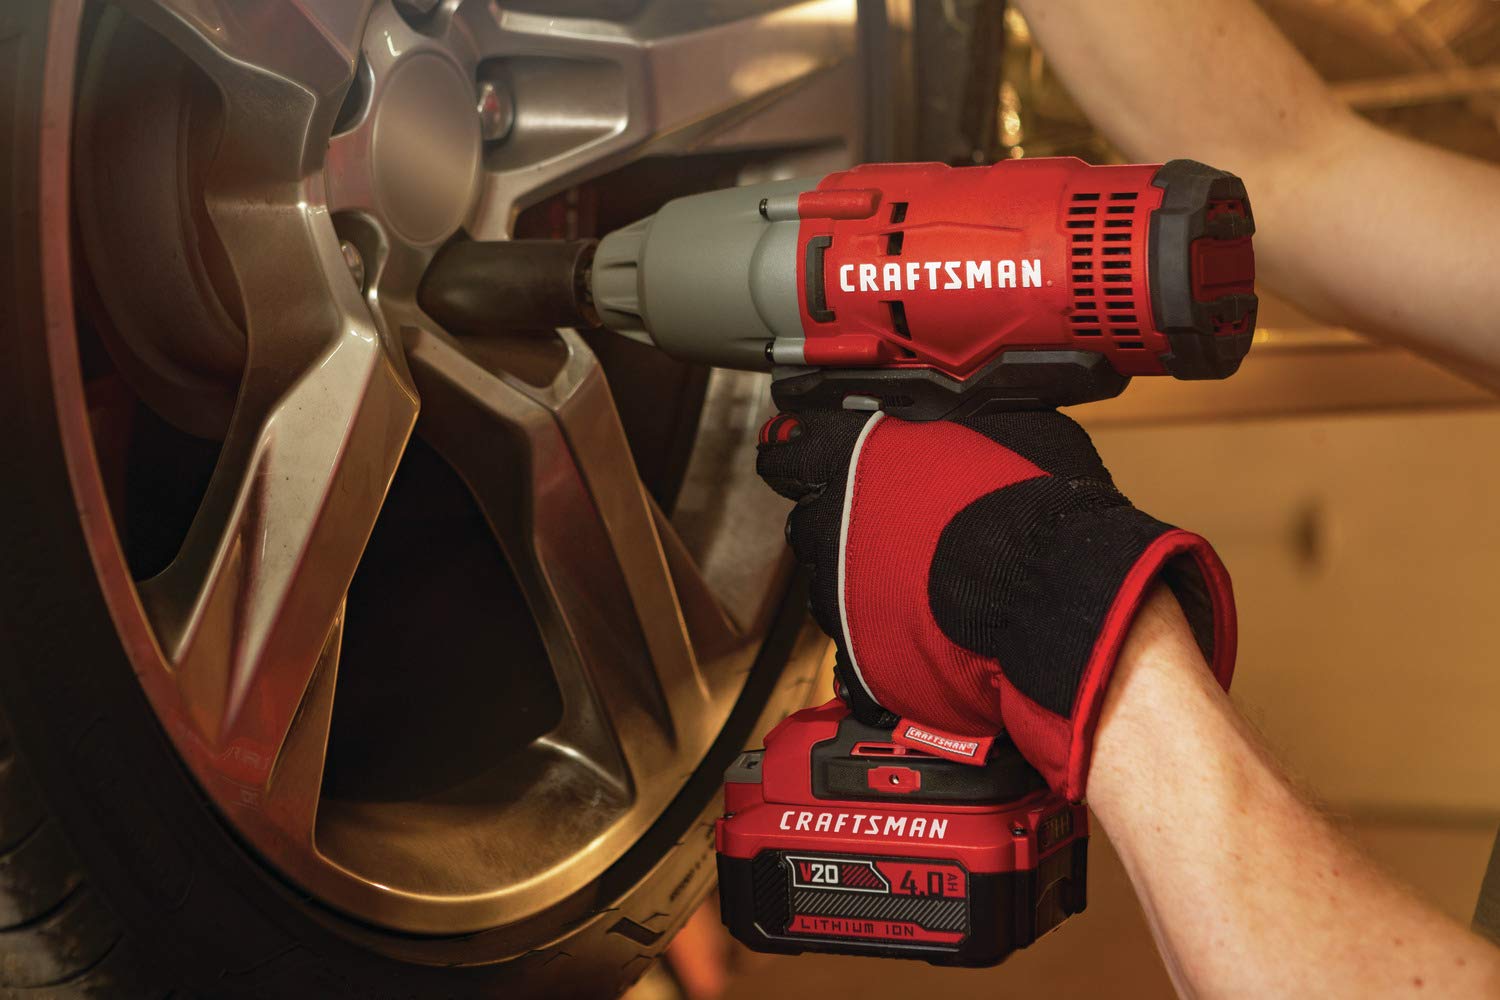 CRAFTSMAN V20 RP Cordless Impact Wrench Kit, 1/2 inch, Battery and Charger Included (CMCF900M1)